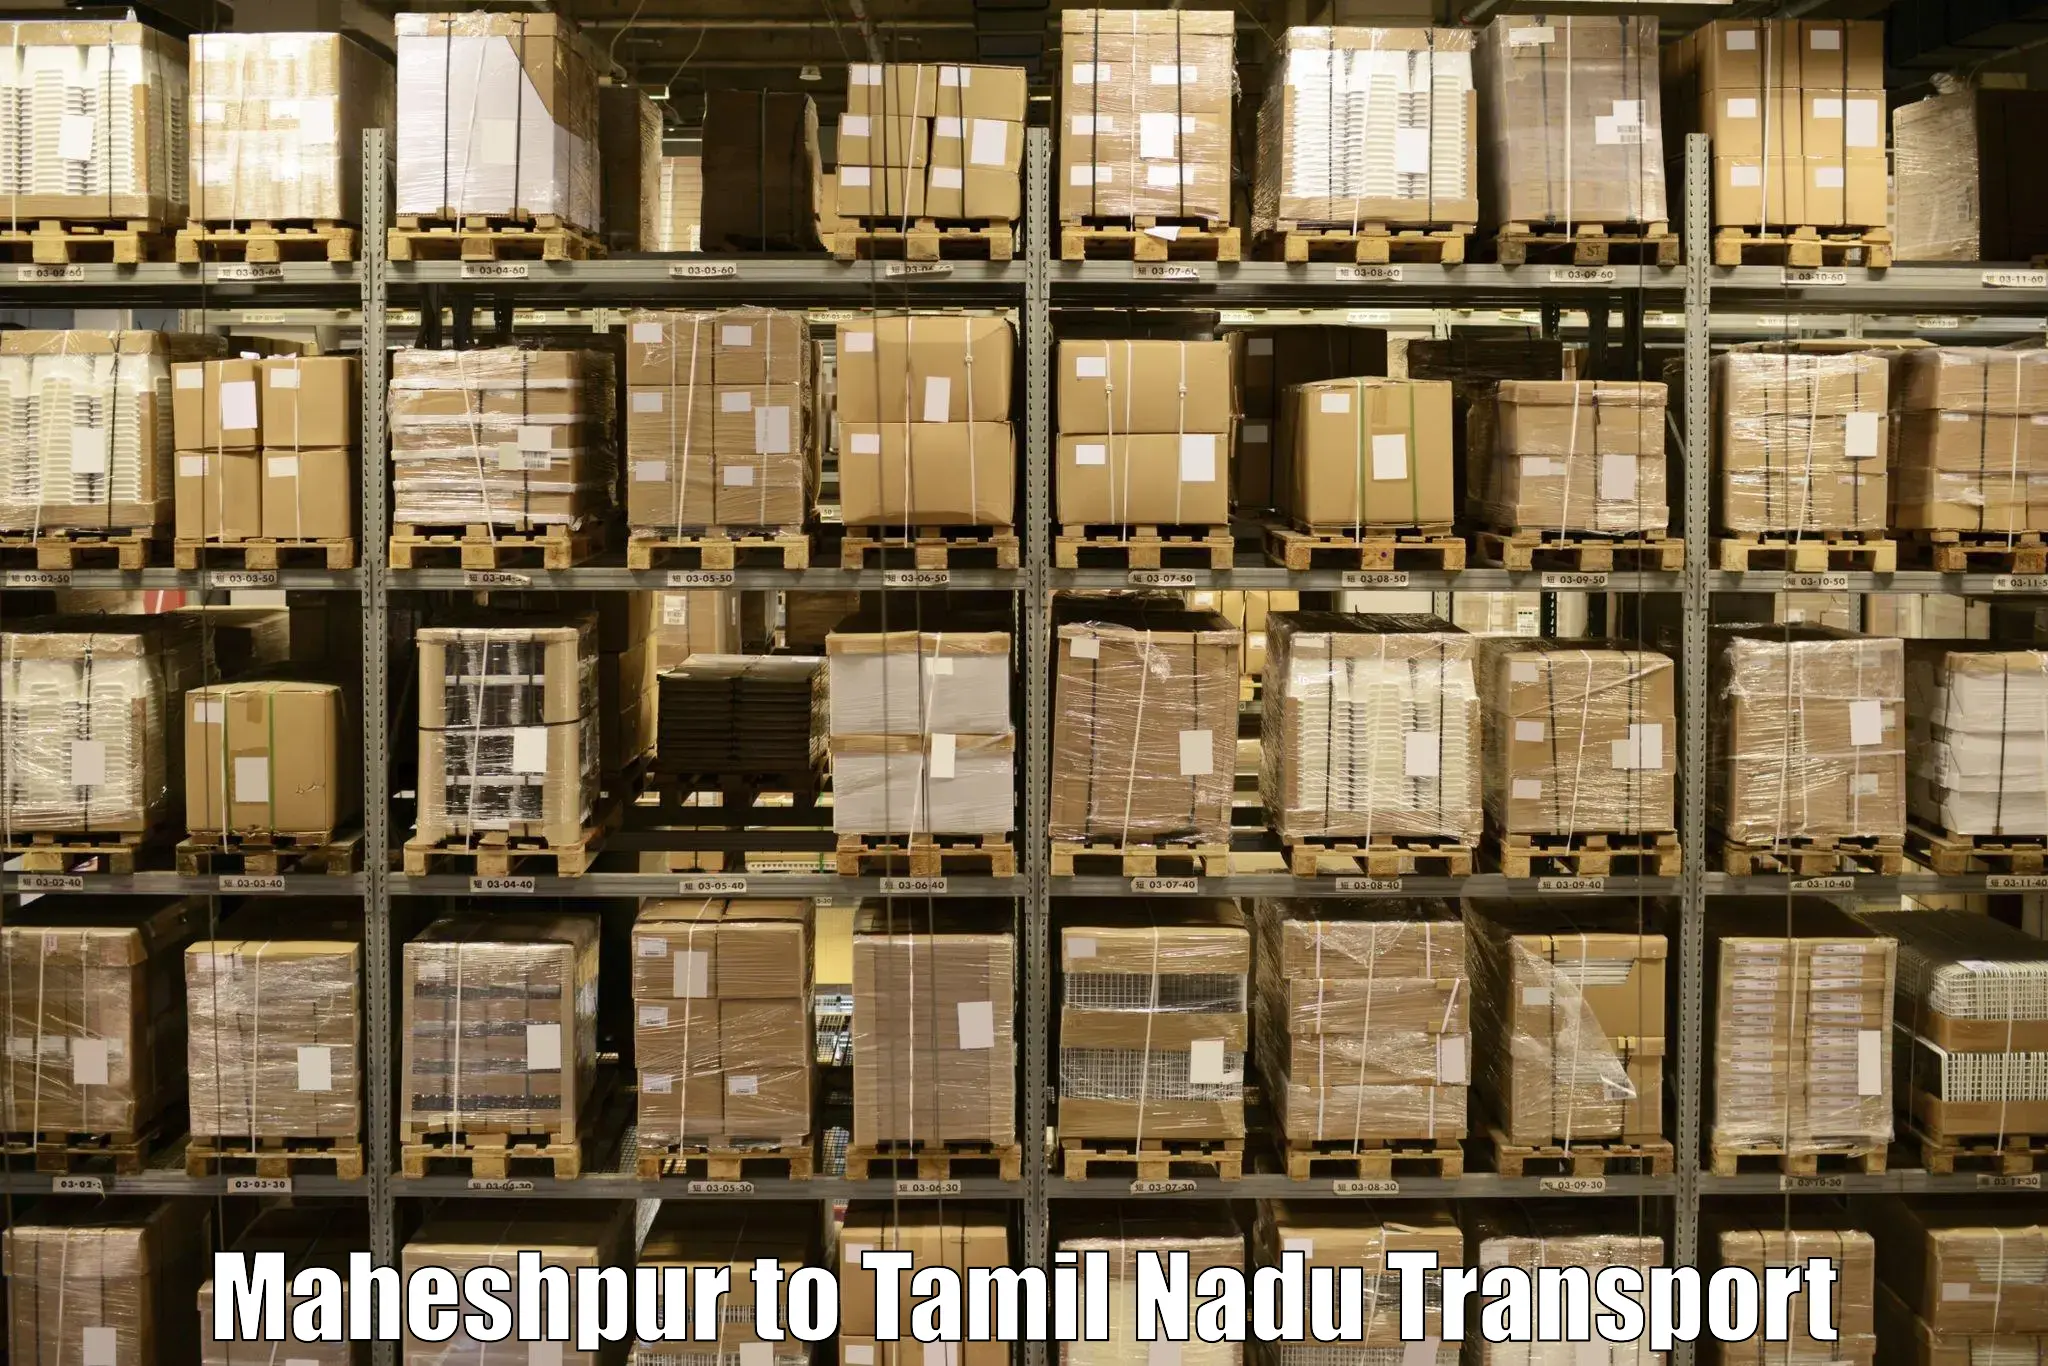 Online transport service Maheshpur to Nagercoil